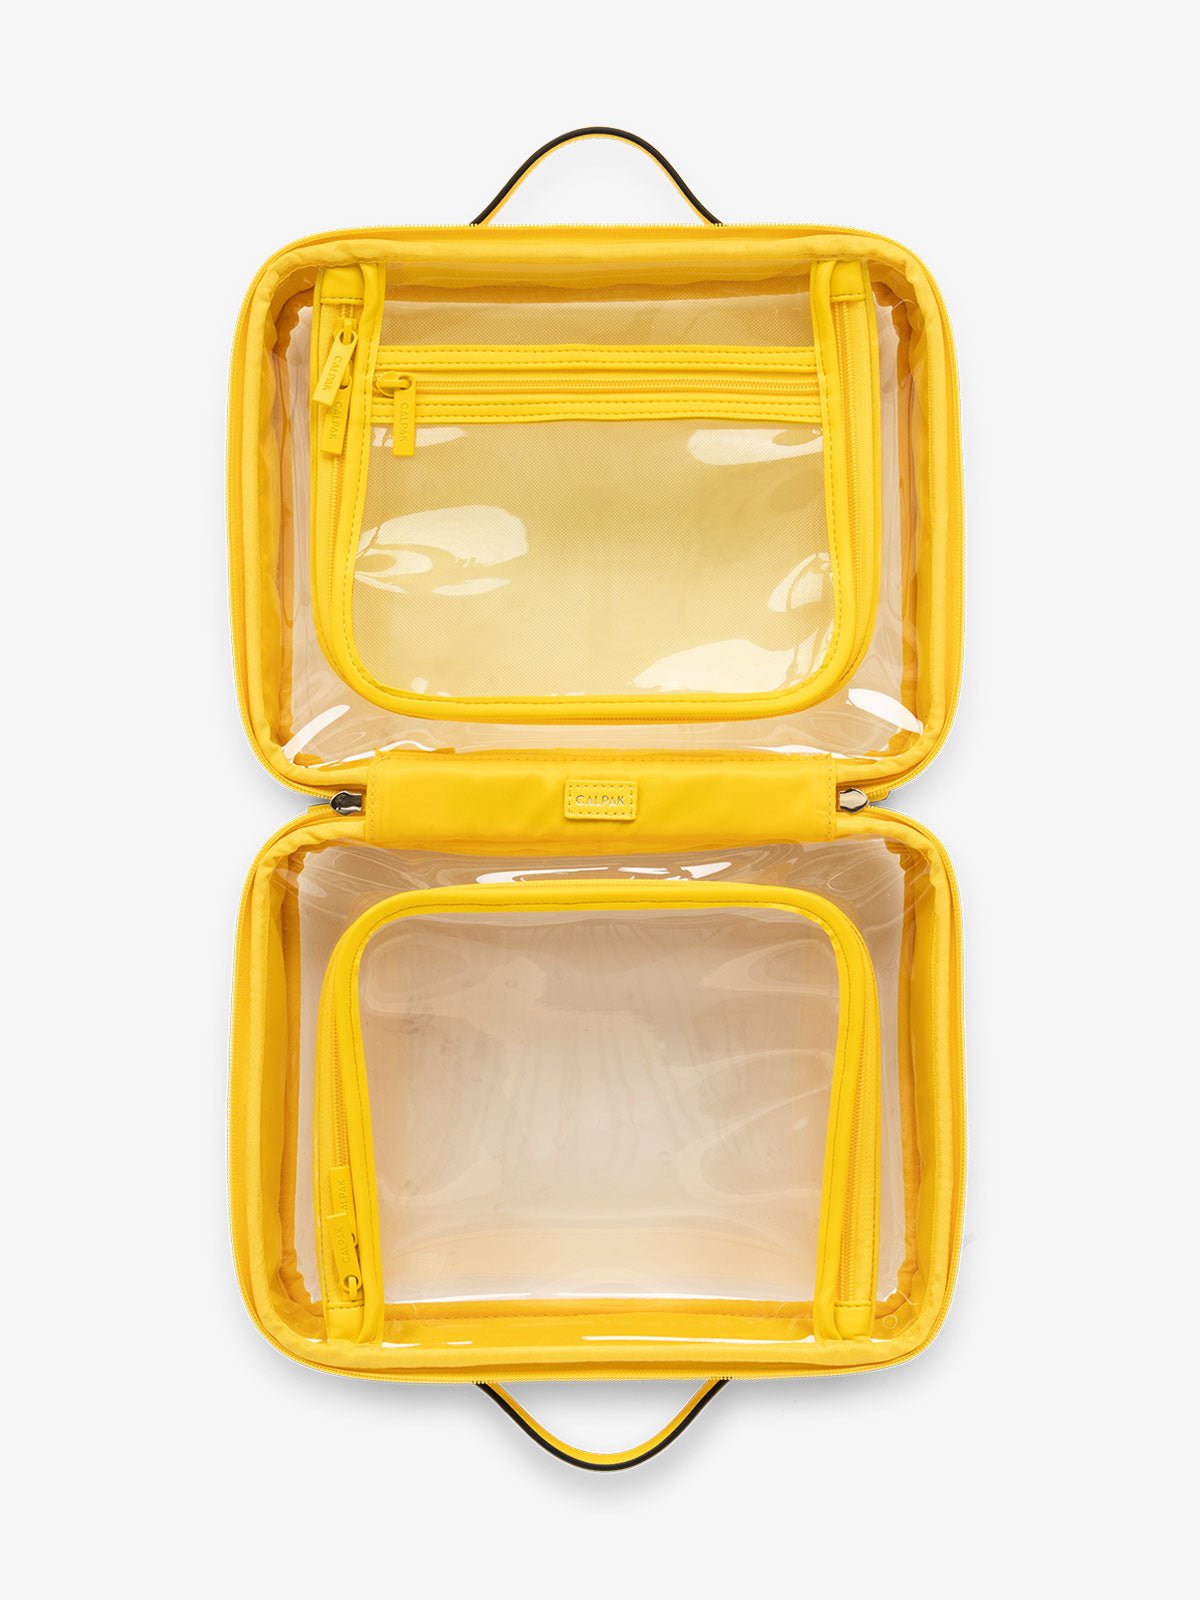 CALPAK large transparent water resistant travel makeup bag with compartments in bright yellow lemon